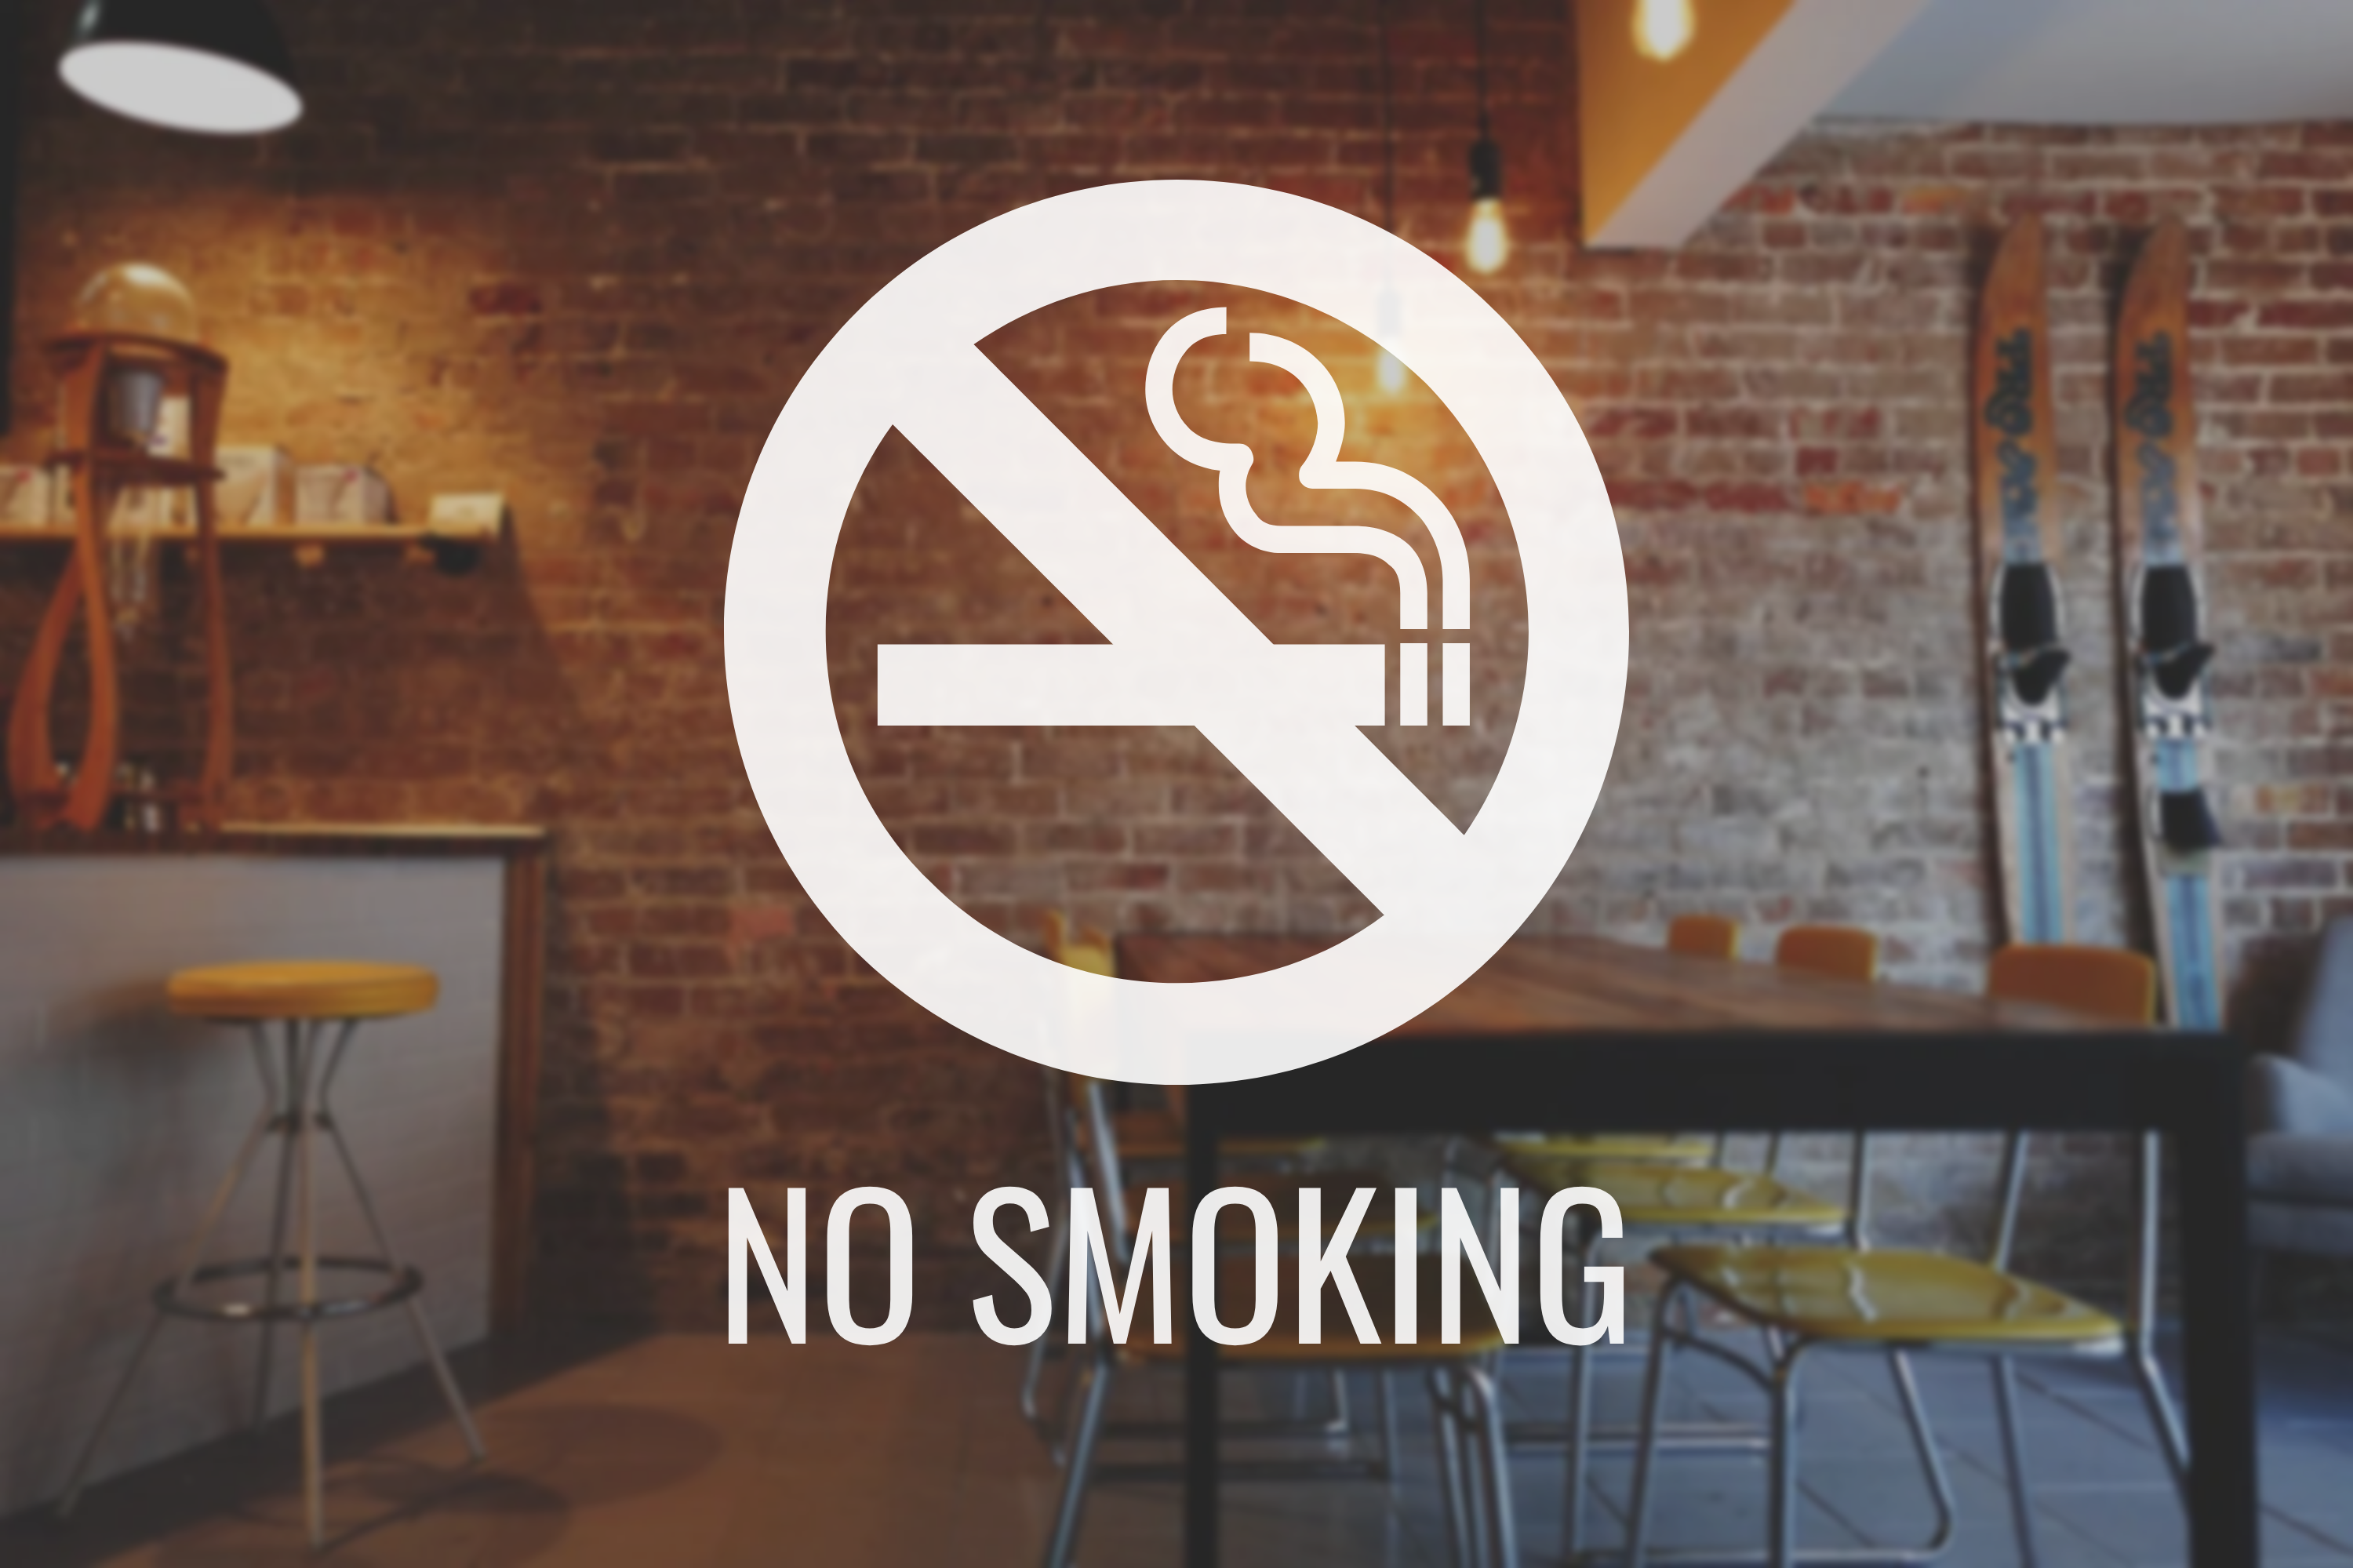 No Smoking decal with Symbol - Vinyl Sticker for Businesses, Stores, Bars, Coffee Shops, Eatery, Cafeteria, Food Truck!